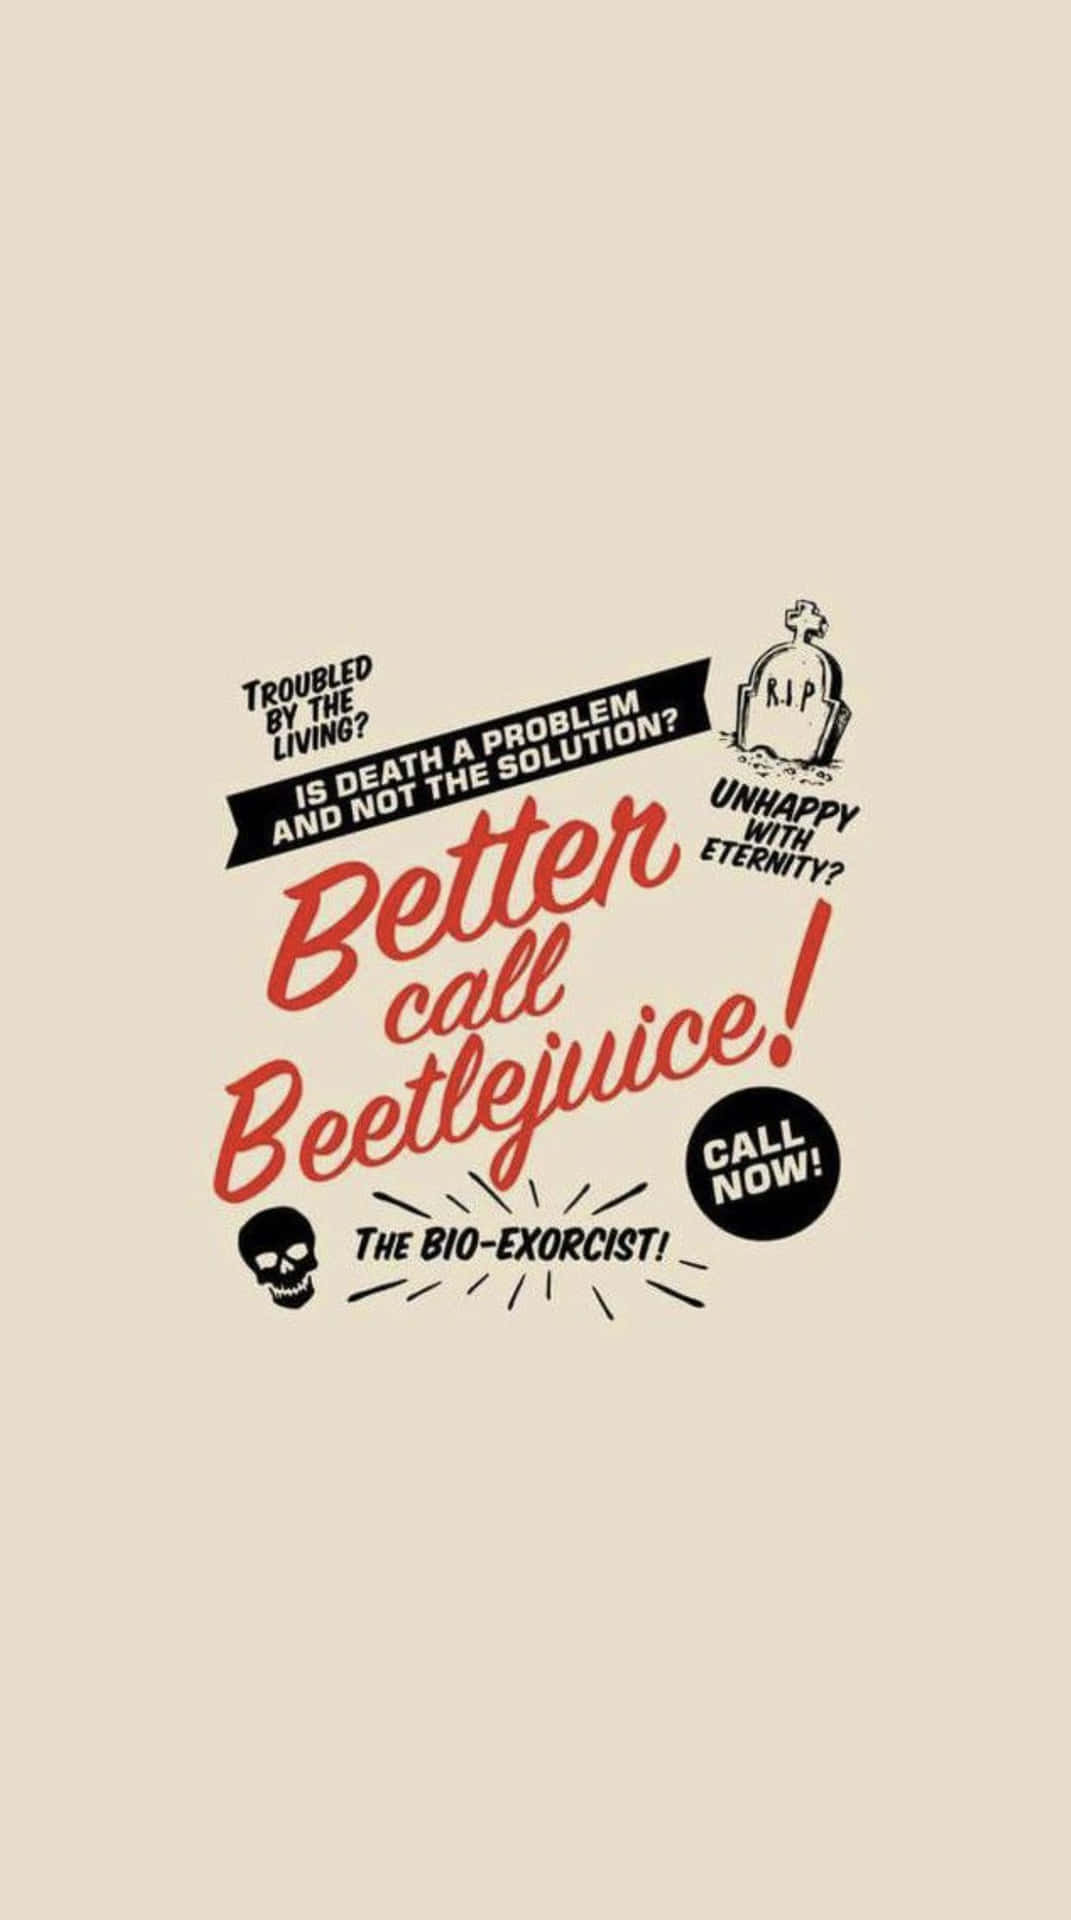 Get Ready To Have Some Scare-tastic Fun With Beetlejuice